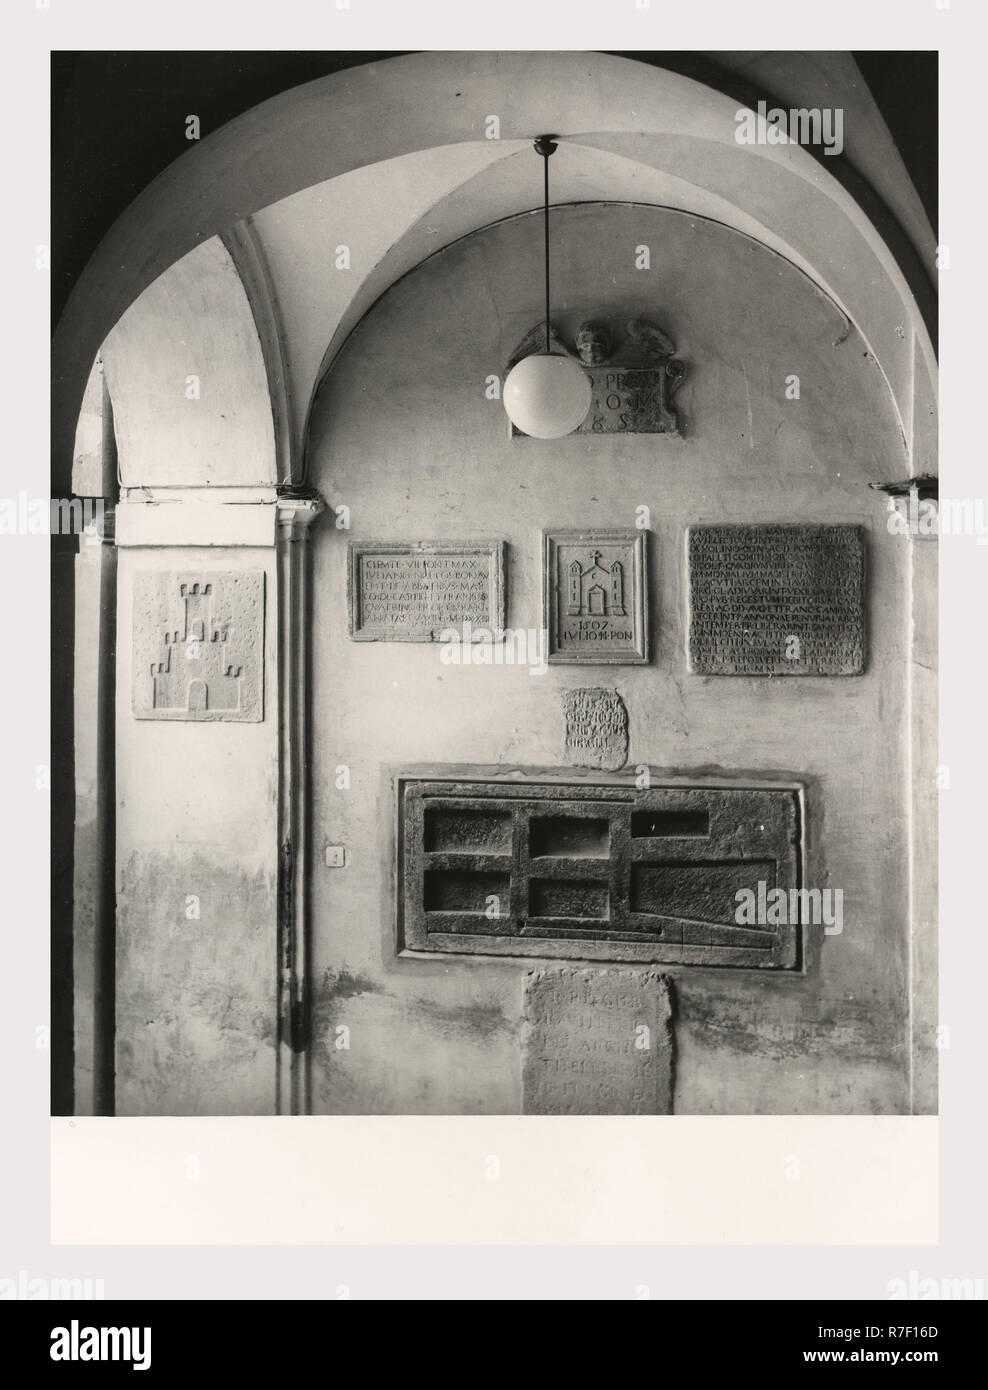 Marches Macerata San Severino Marche Museo Archeologico, this is my Italy, the italian country of visual history, Antiquities Interior views of Roman spolia, gravestones, an altar and architectural fragments. The Museo Archeologico is dedicated to Giuseppe Moretti. Stock Photo